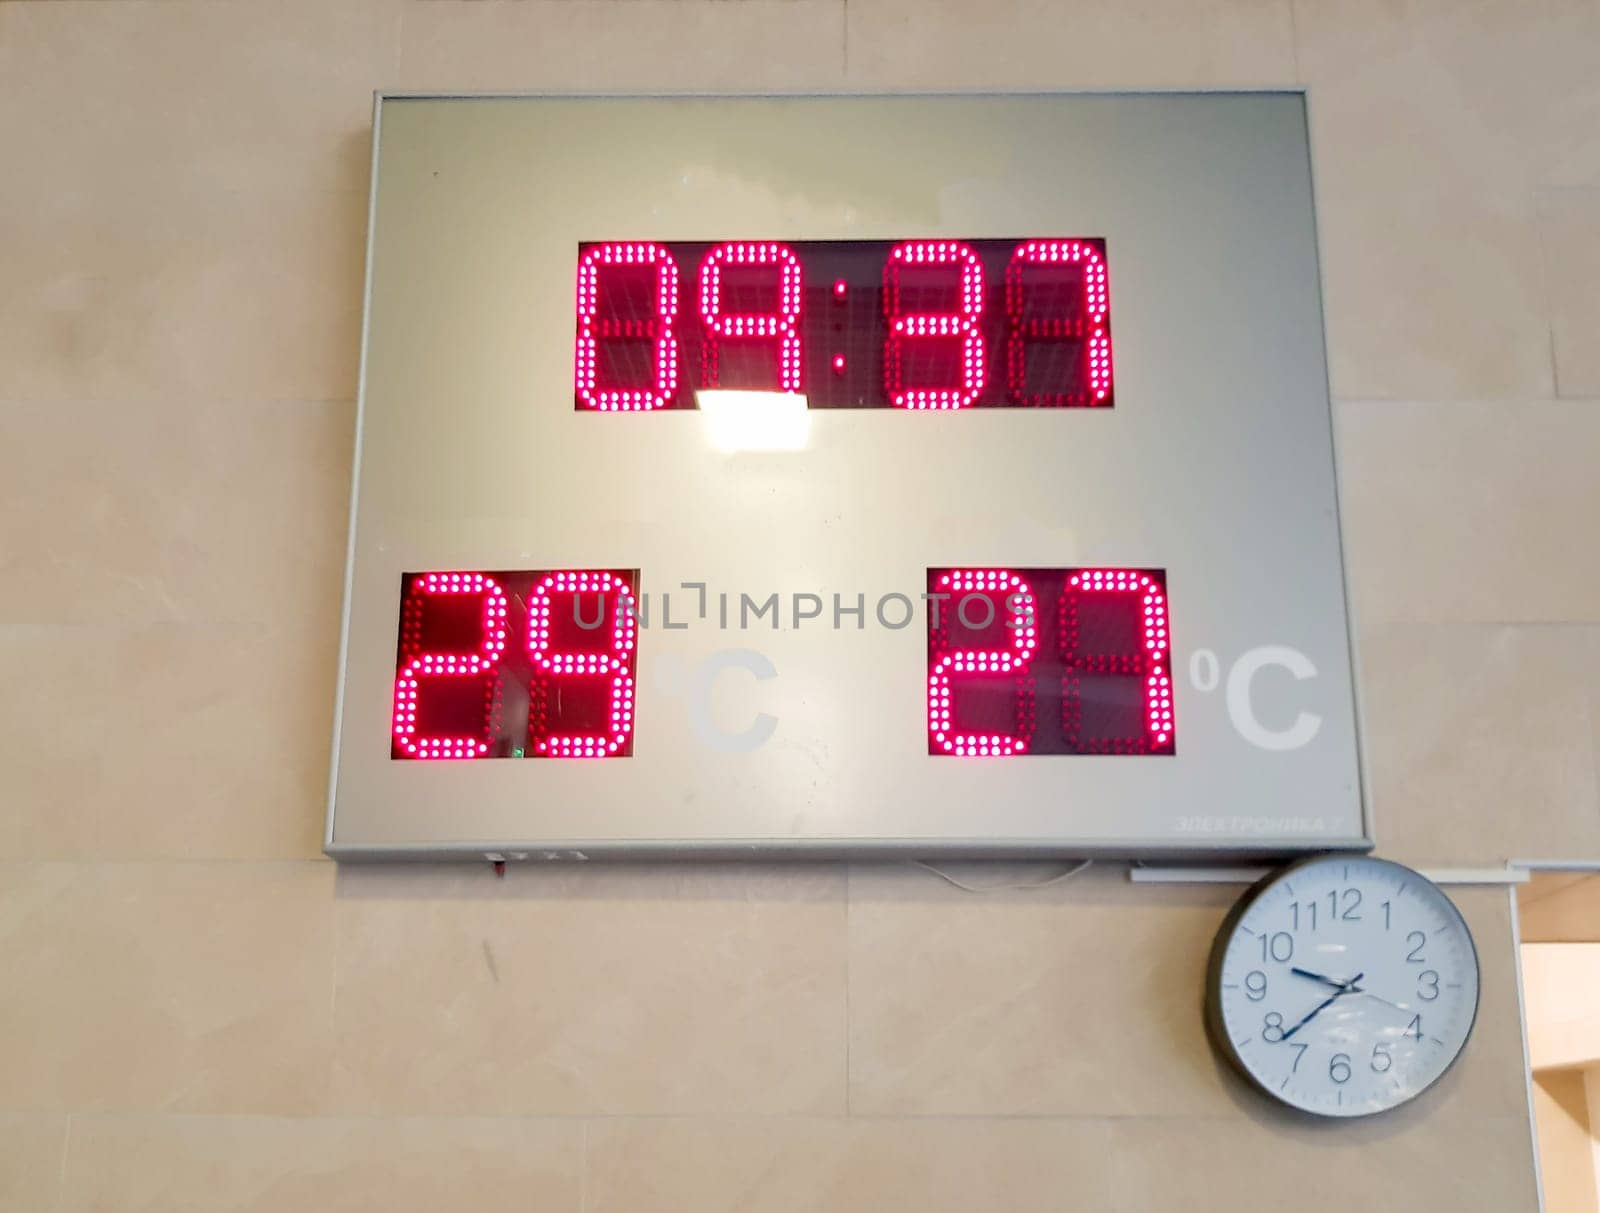 LED display panel with air and water temperature, round classic clock on the wall.